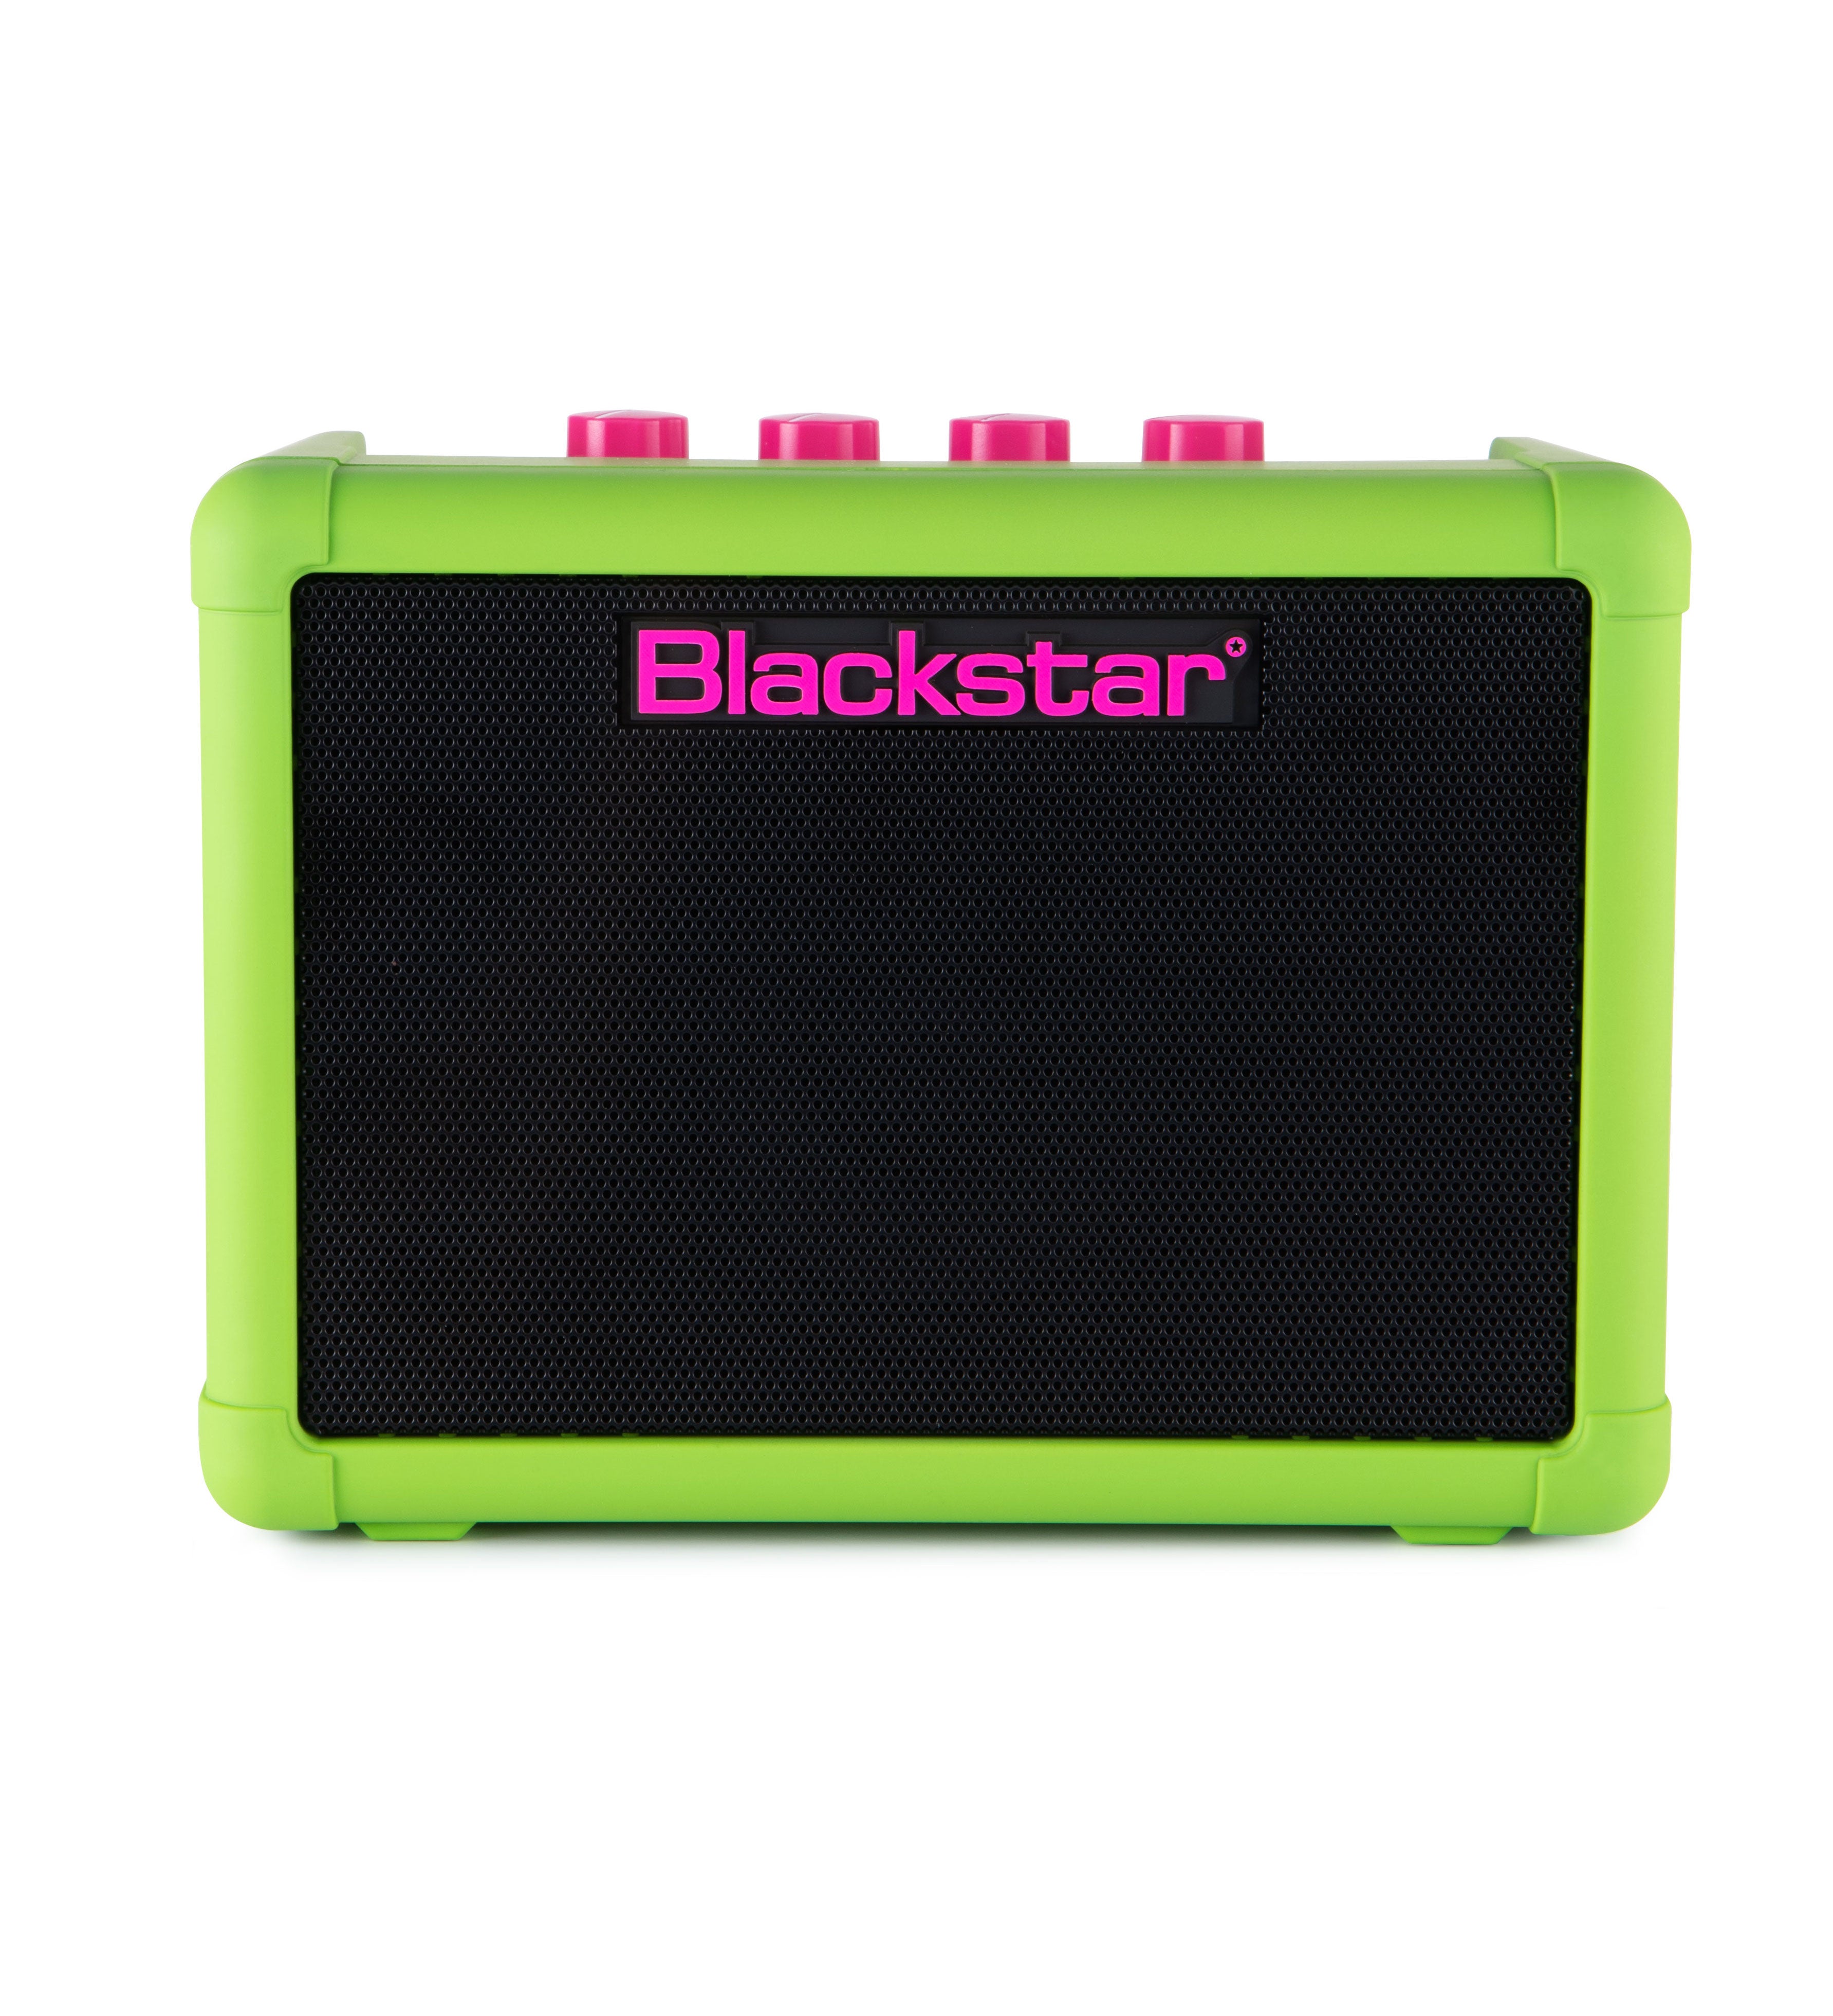 Blackstar FLY3 Neon Green Limited Edition — Tom Lee Music